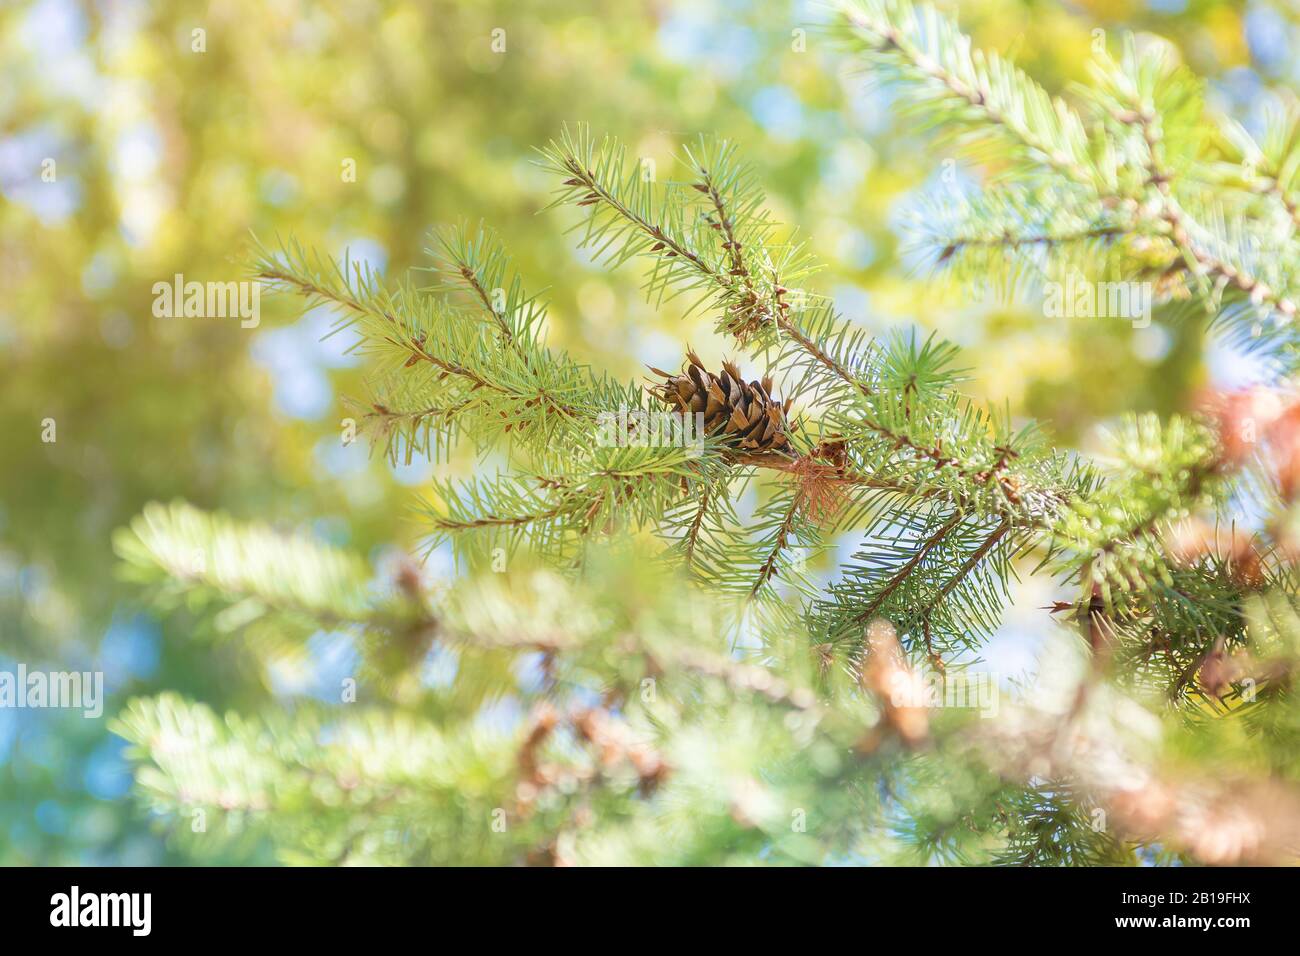 Branches of green fir tree, close up Stock Photo